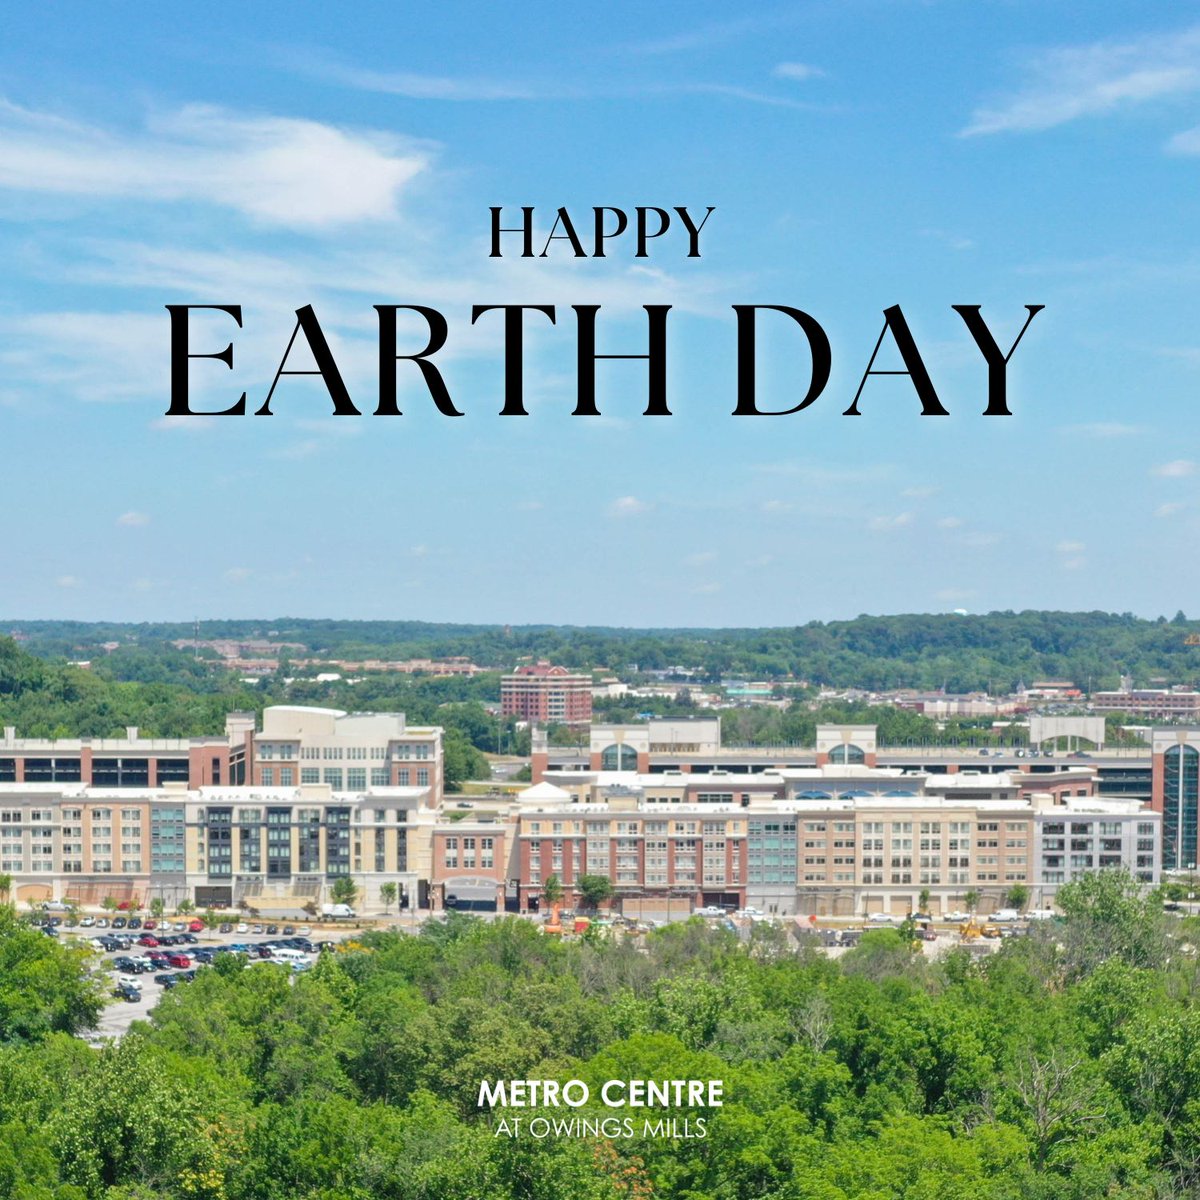 As we reflect on Earth Day, let's continue to embrace innovative solutions and work together to build a brighter, more sustainable future for our planet. Together, we can make a difference.

#EarthDay #Sustainability #RealEstateConstruction #BuildingForTheFuture